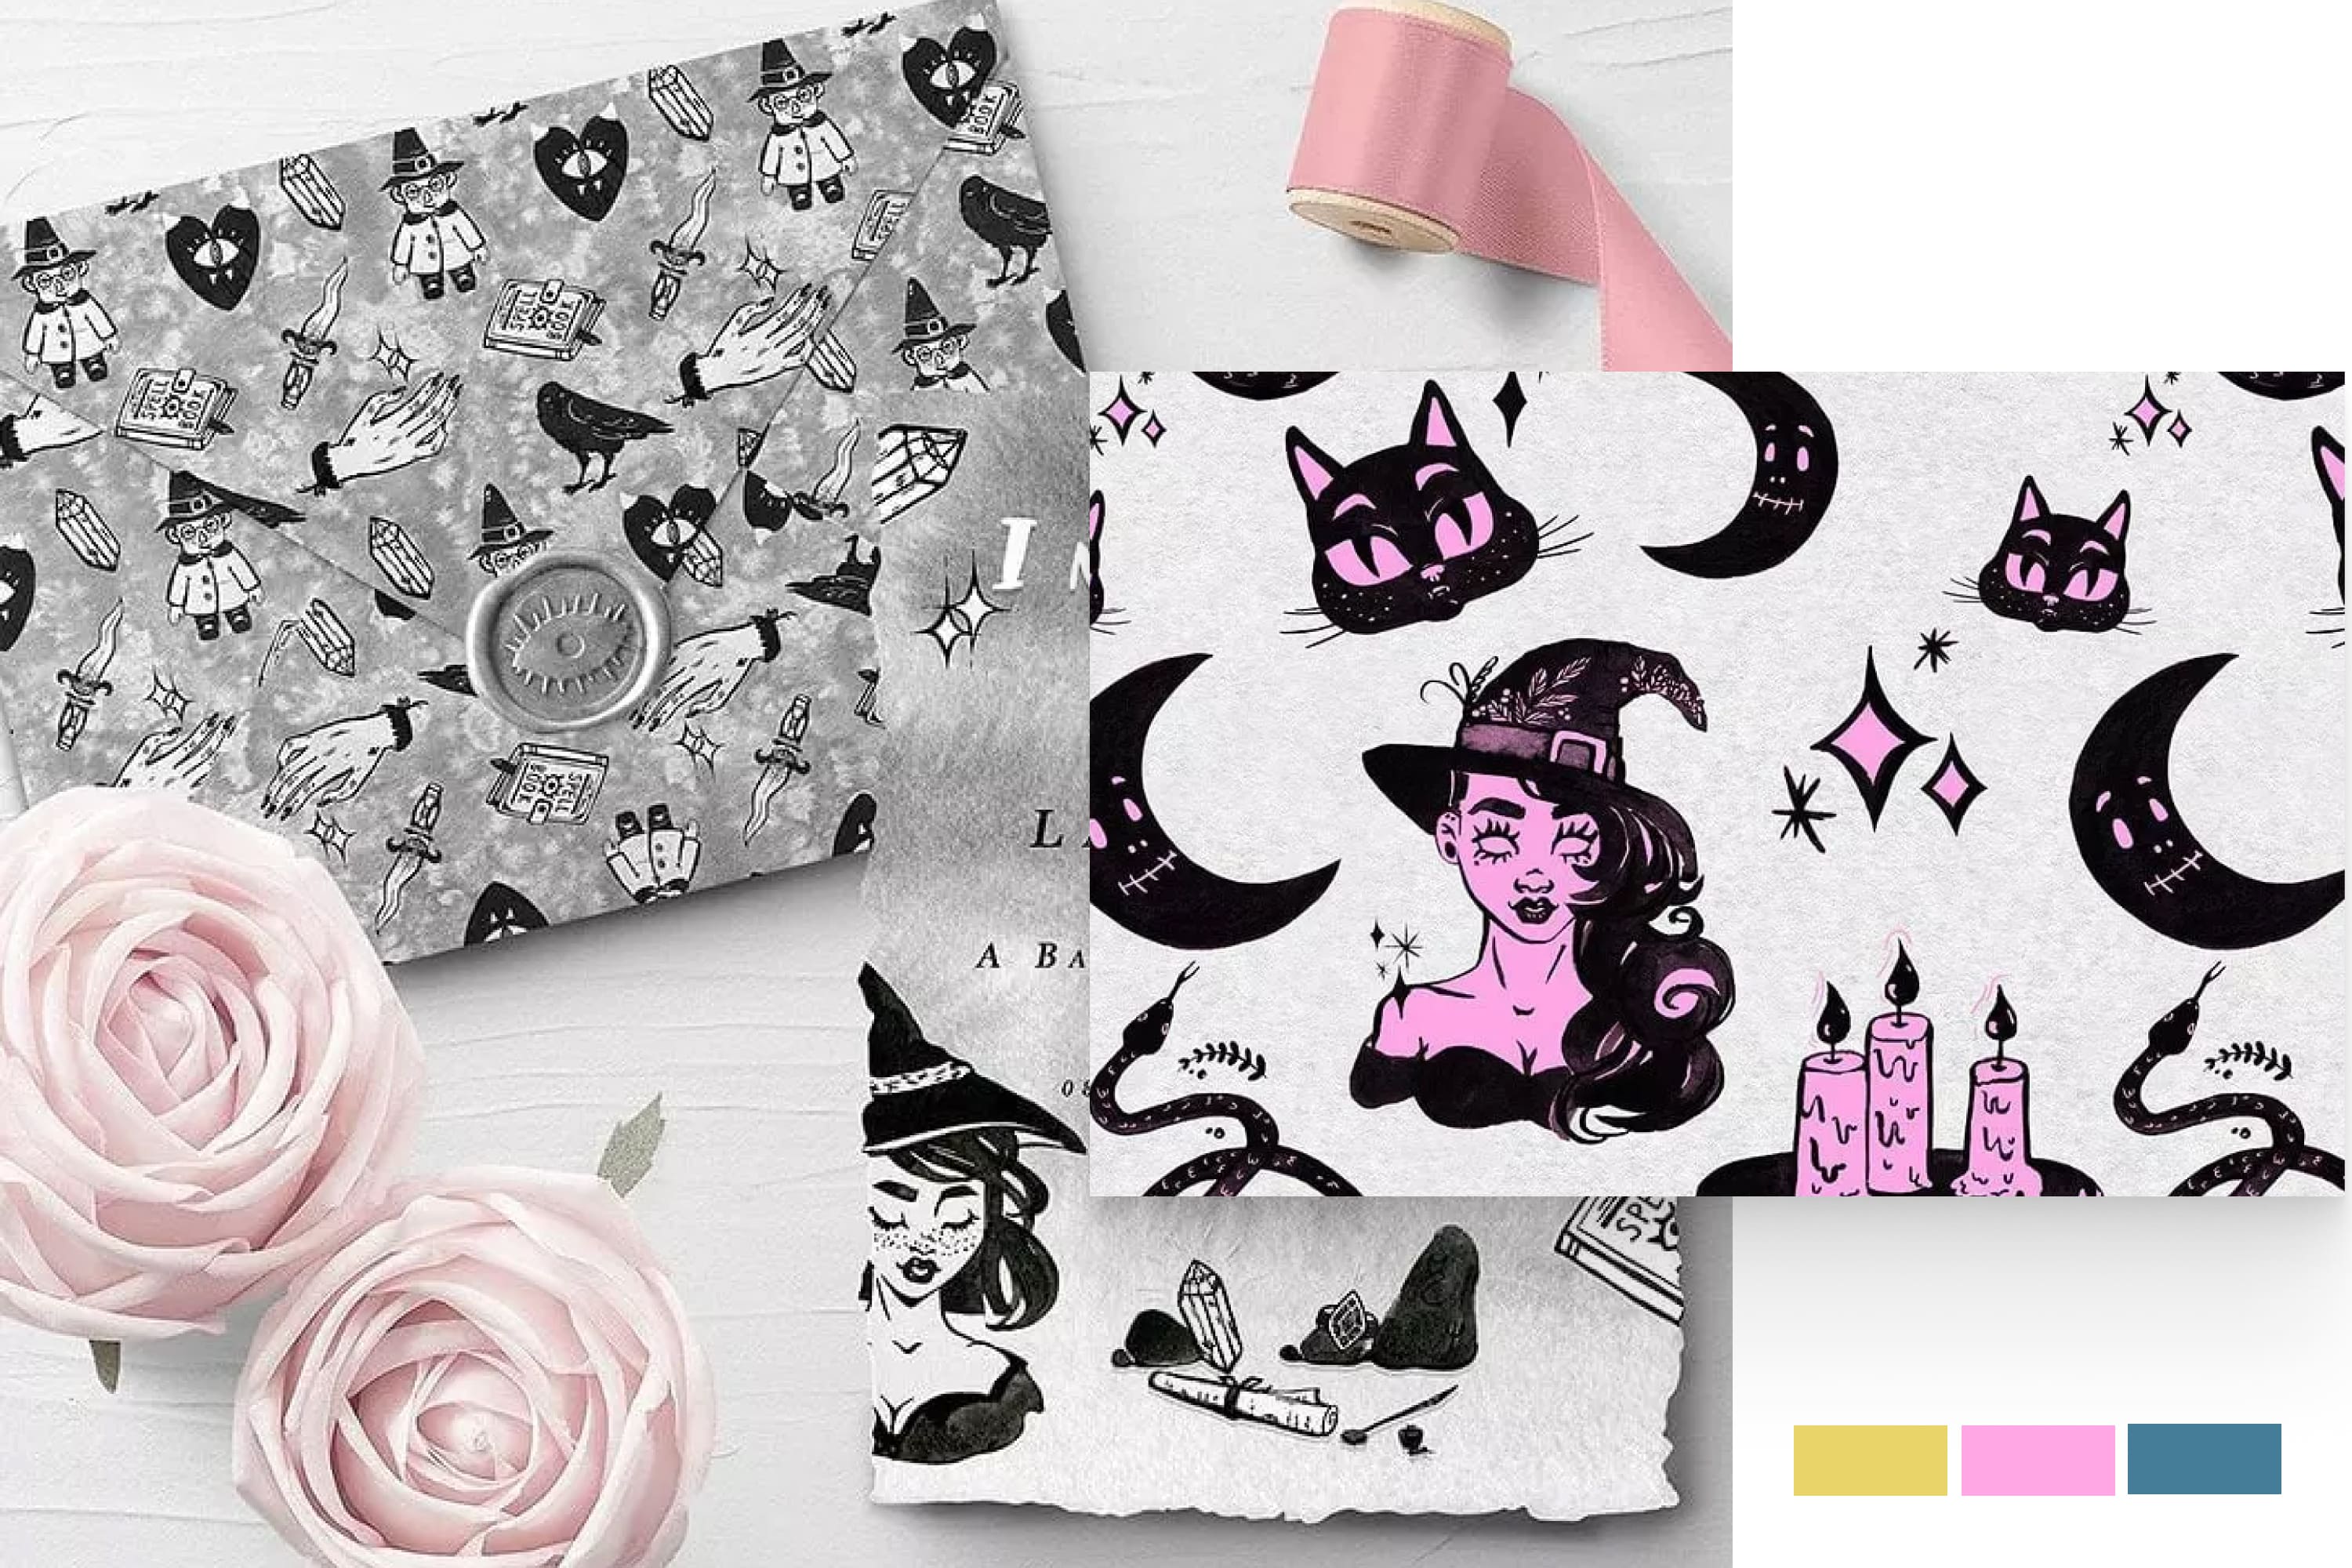 Collage of stickers on the theme of Halloween on in gray and pink colors.